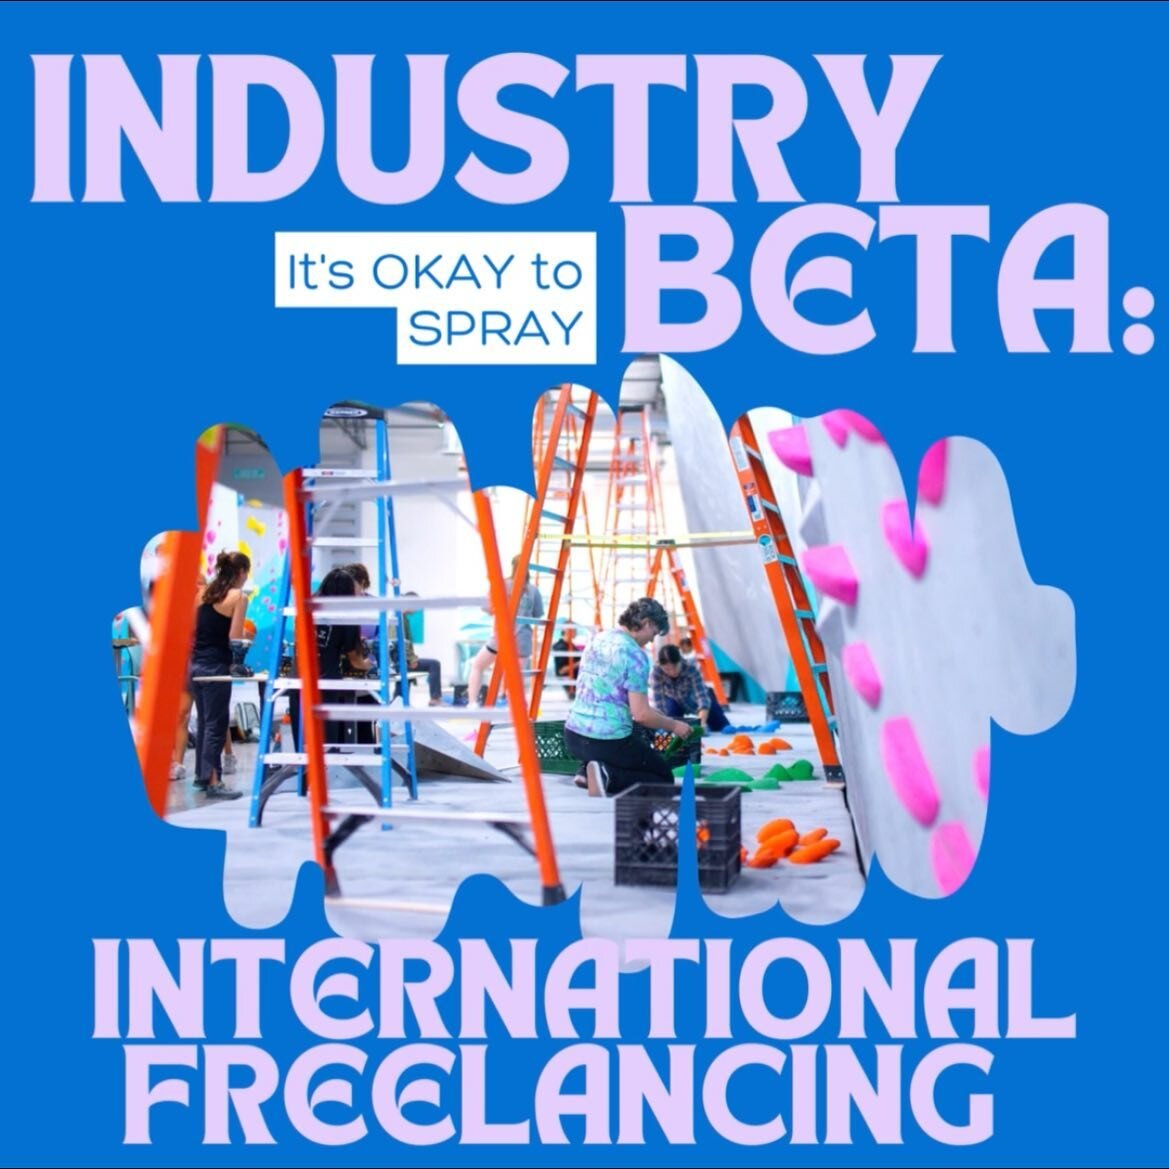 Some folks in our community gave input on the &ldquo;beta&rdquo; for freelance setting as a visitor in Europe. Check out their input &amp; drop your own suggestions in the comments 🫶🏾

&ldquo;Trying to learn the language (enough to get by or be pol